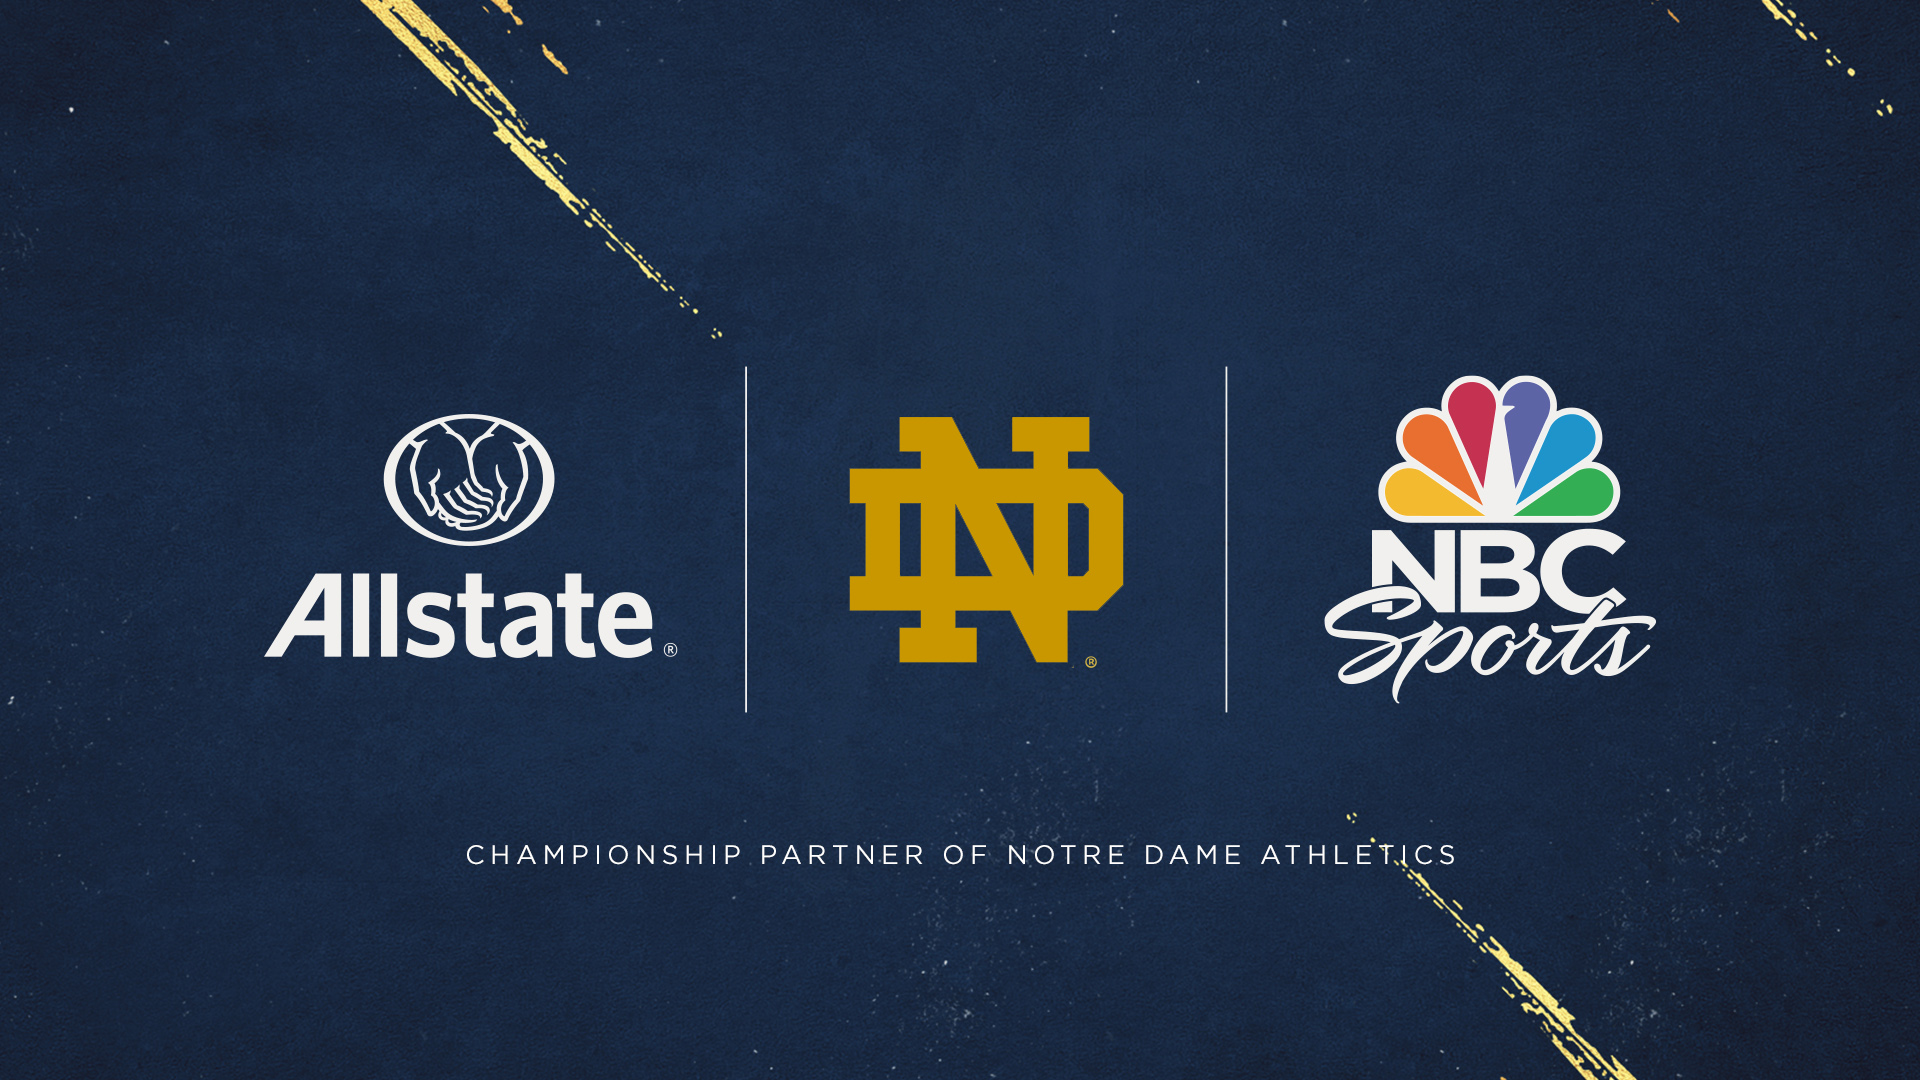 Allstate Expands its College Football Footprint with Notre Dame and NBC Sports Partnership